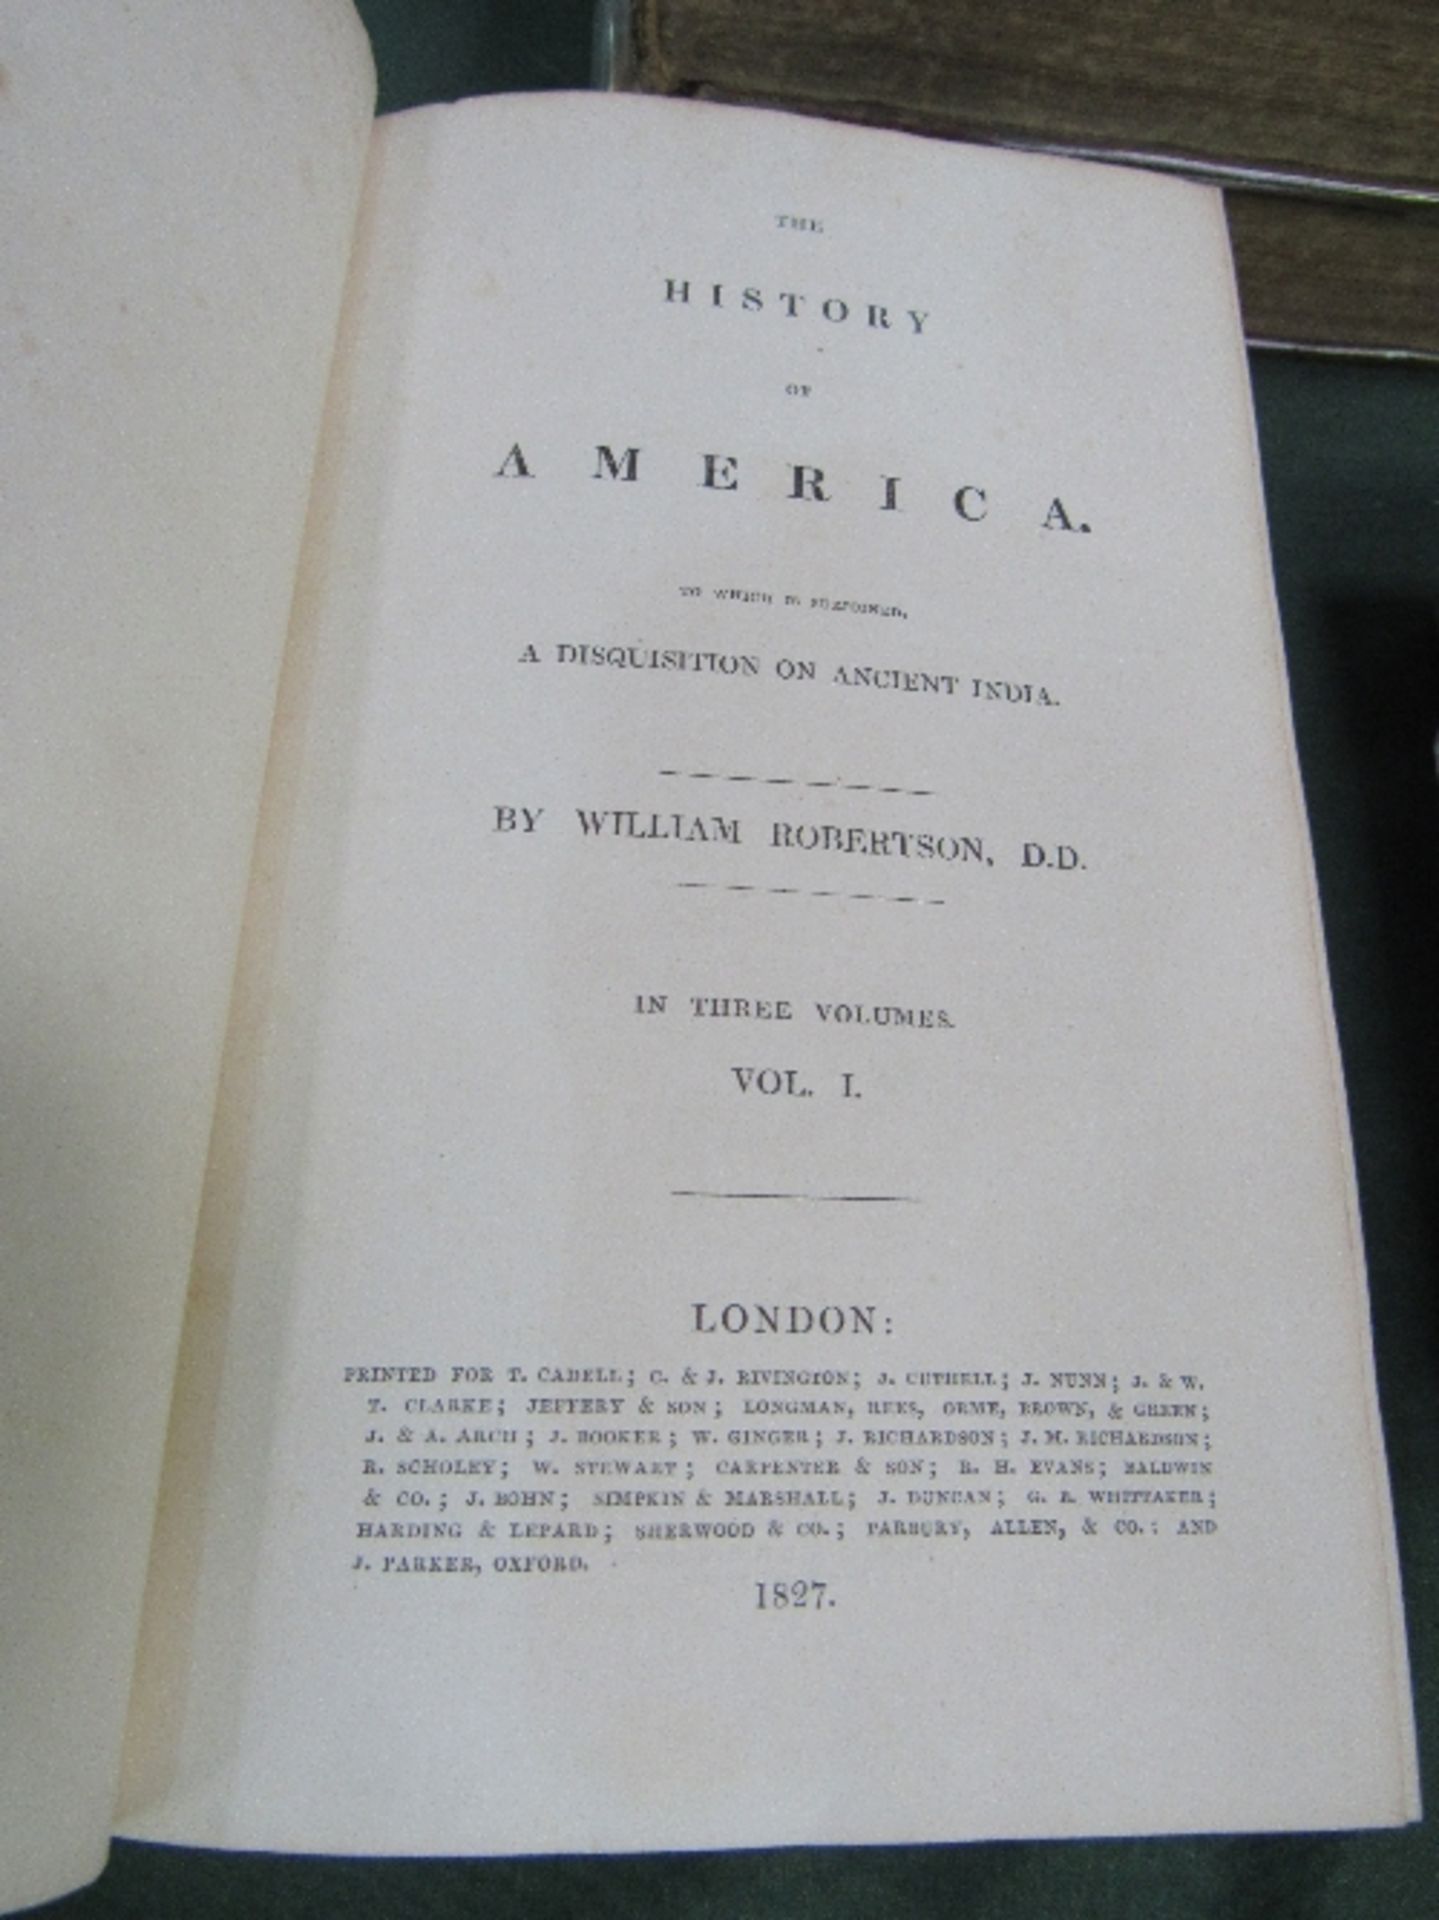 'The History of America' by William Robertson, in 3 volumes, published by Cadell, Rivington & - Image 2 of 2